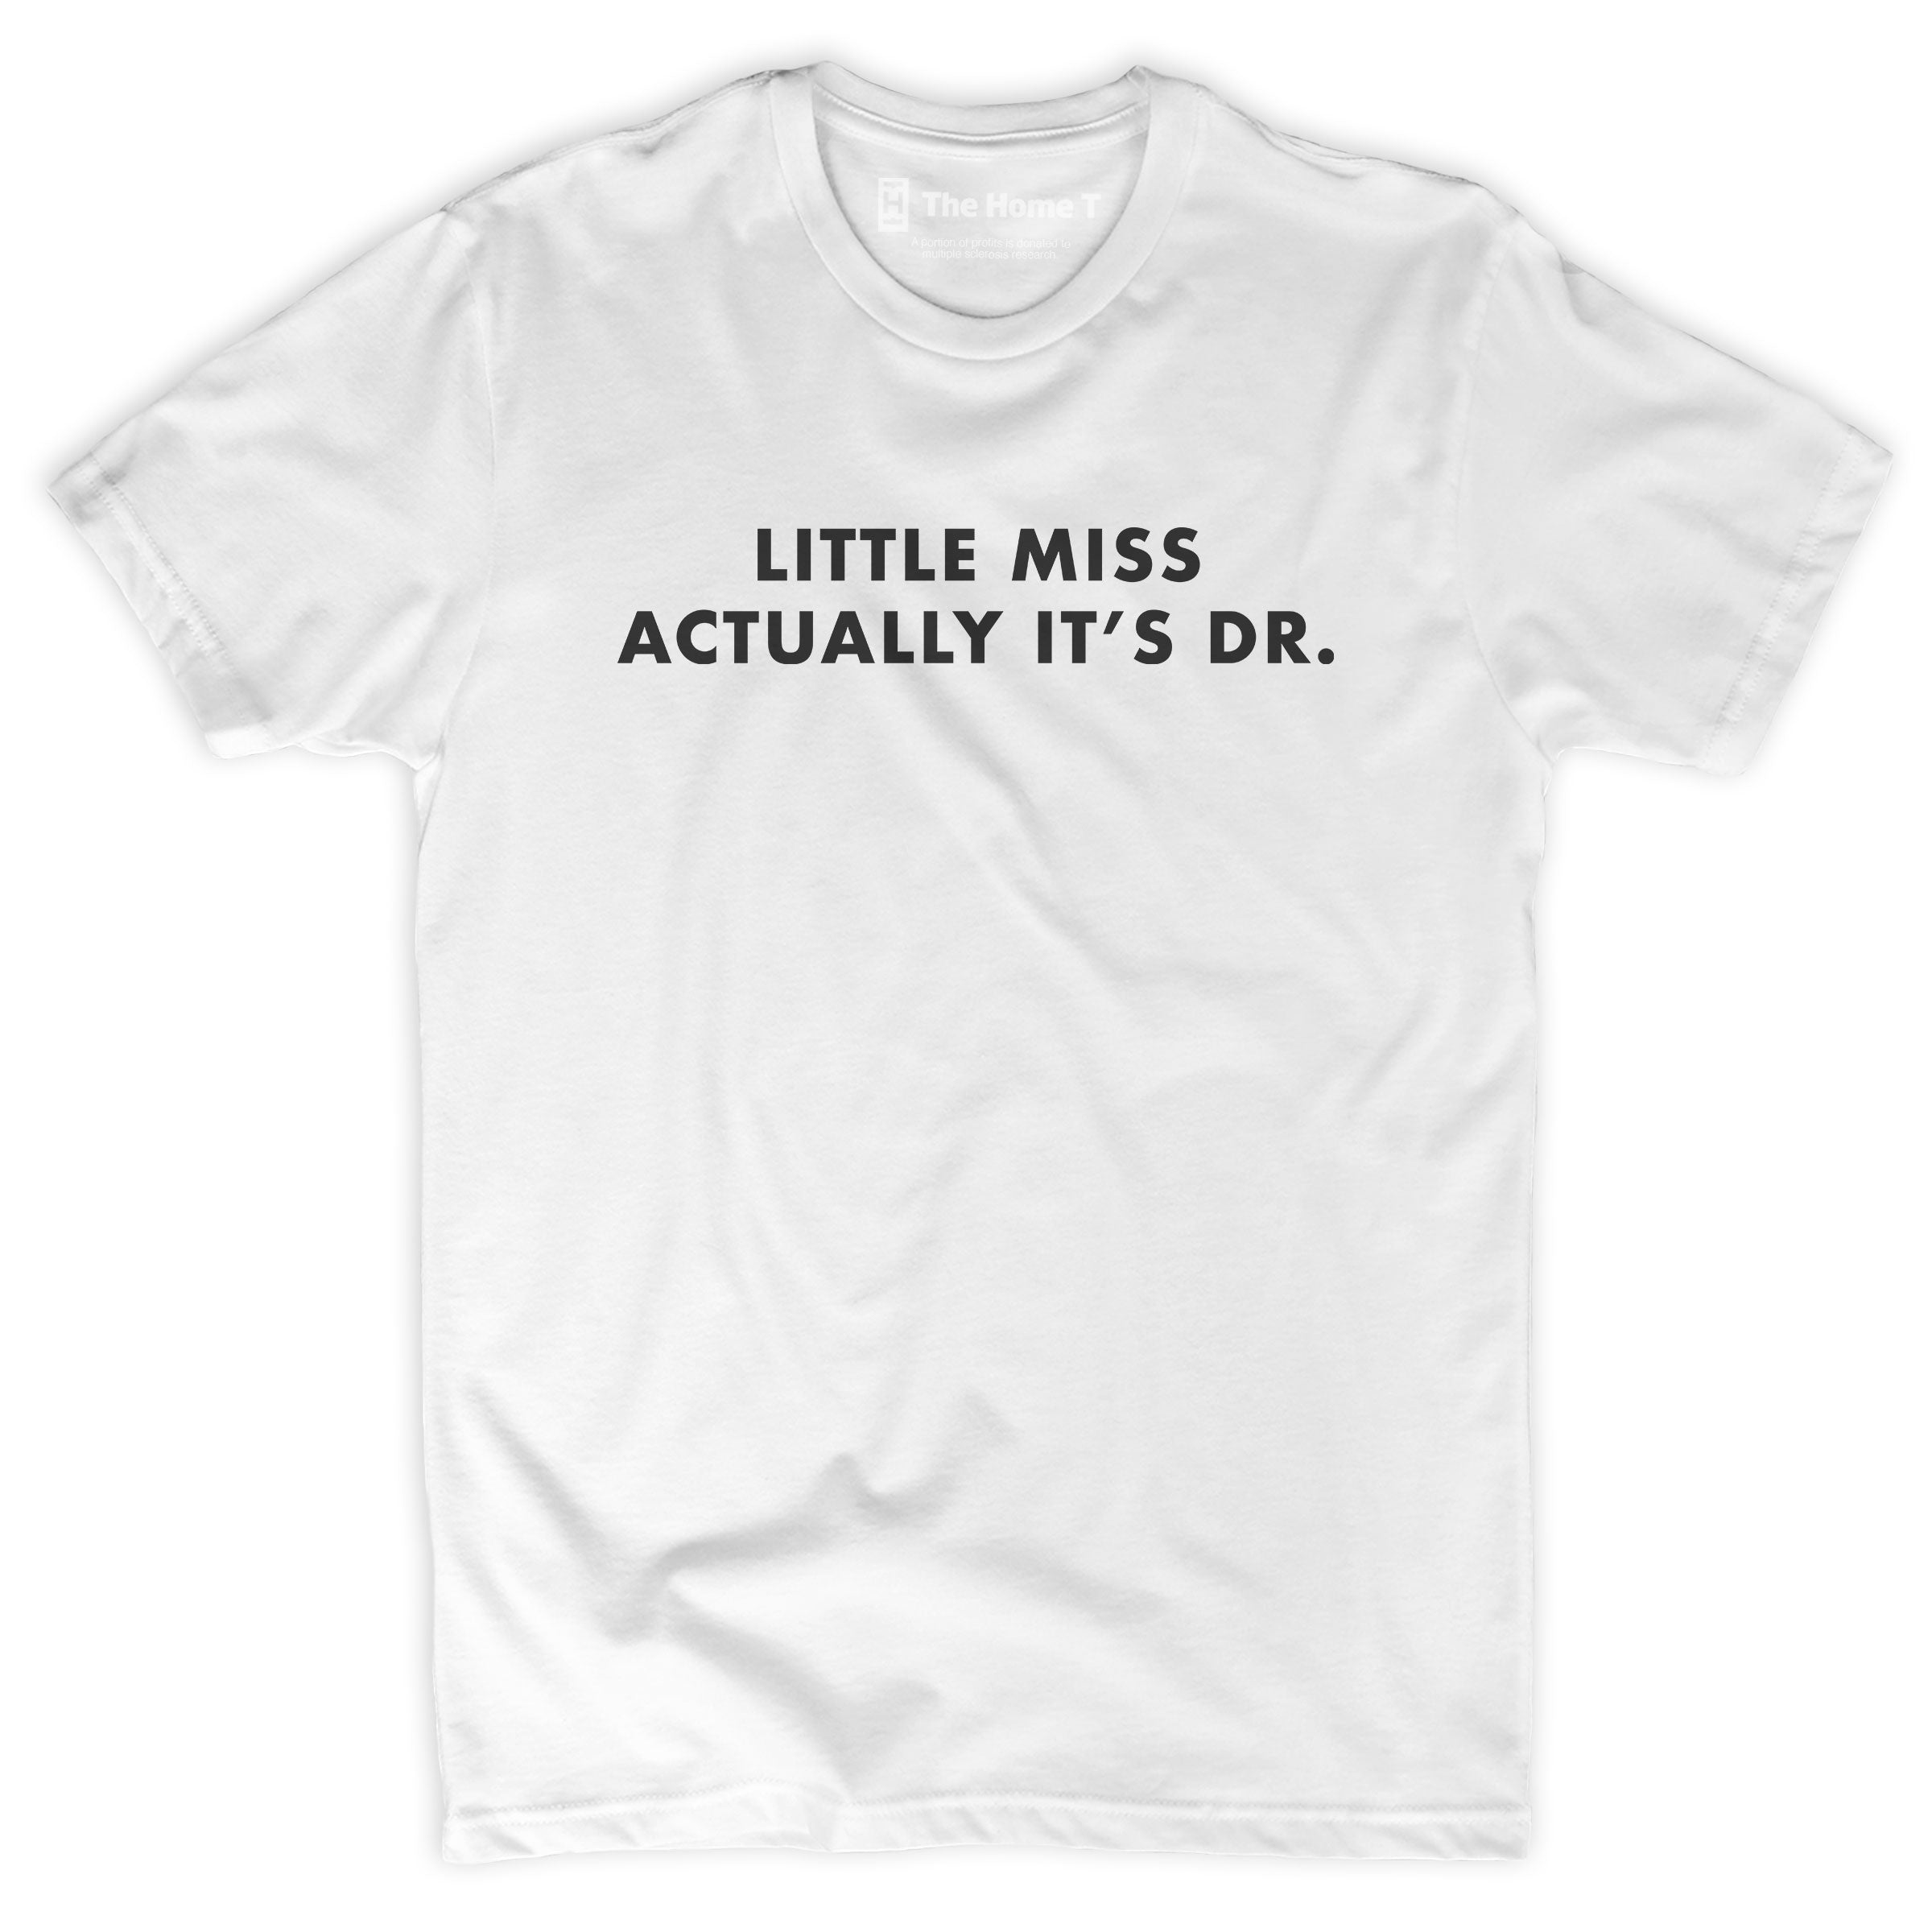 Little Miss Actually It's Dr.